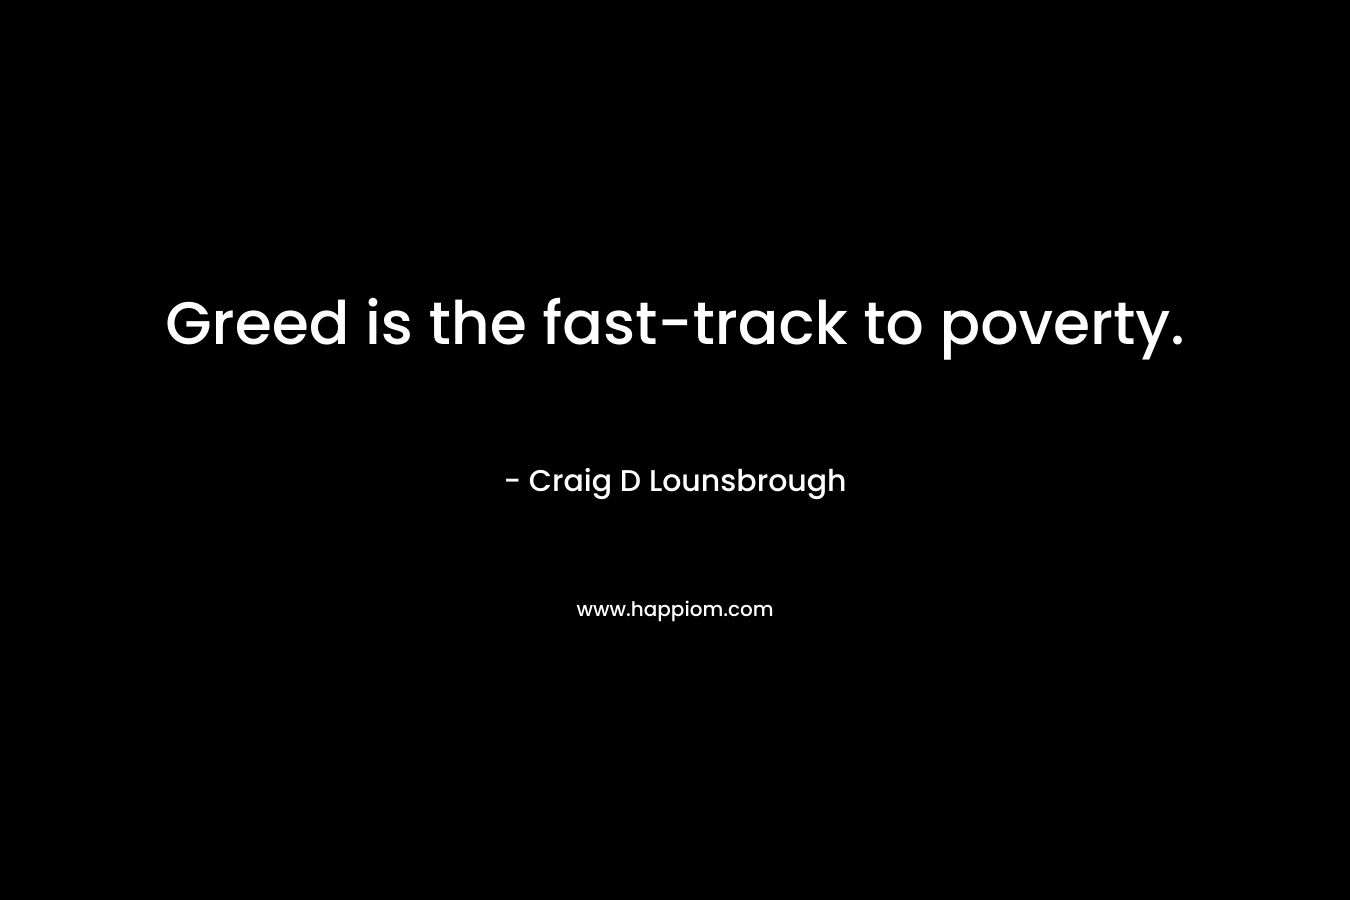 Greed is the fast-track to poverty. – Craig D Lounsbrough